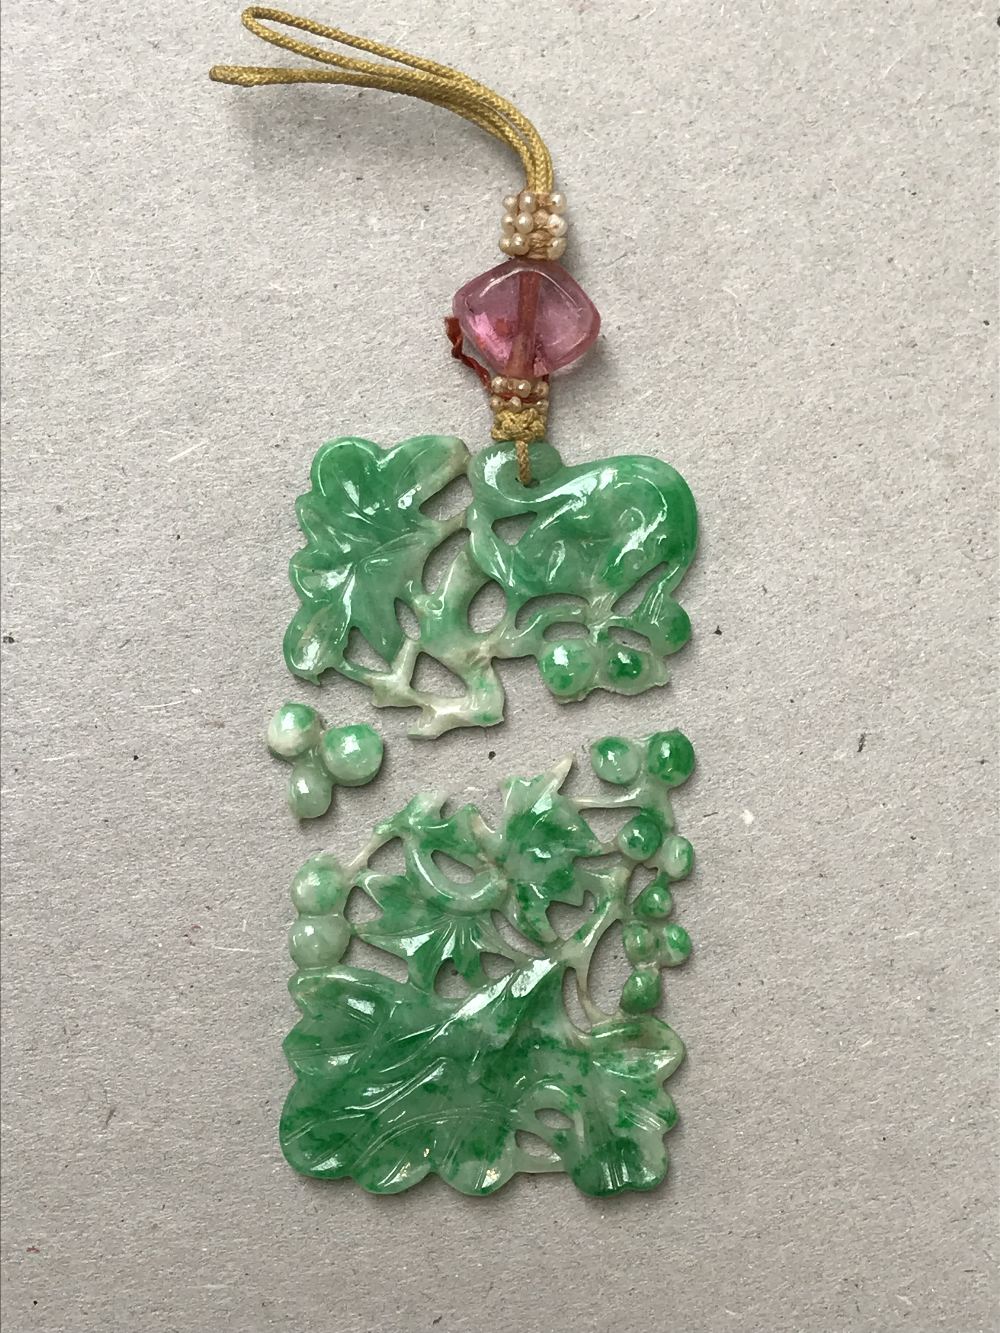 Chinese Jadeite oblong pendent (in 3 pieces) Provenance: from a local country house - Vendor's Great